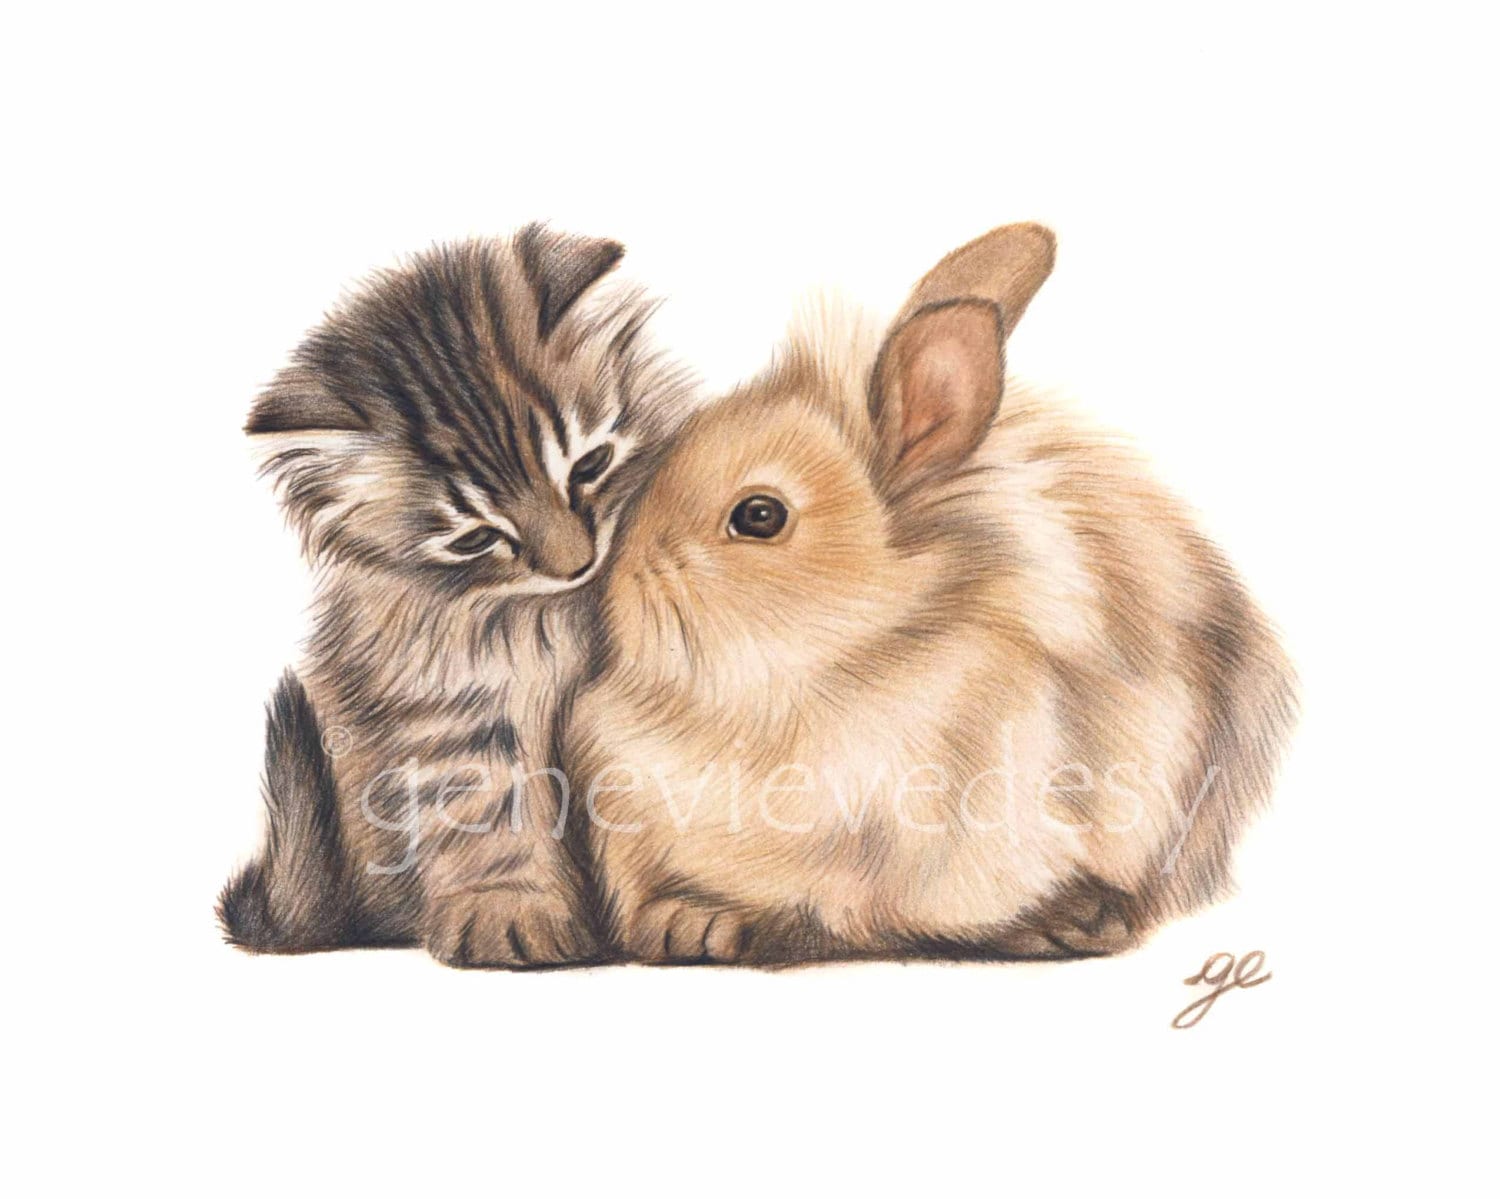 Original drawing of a bunny and cat Bunny and kitten drawing